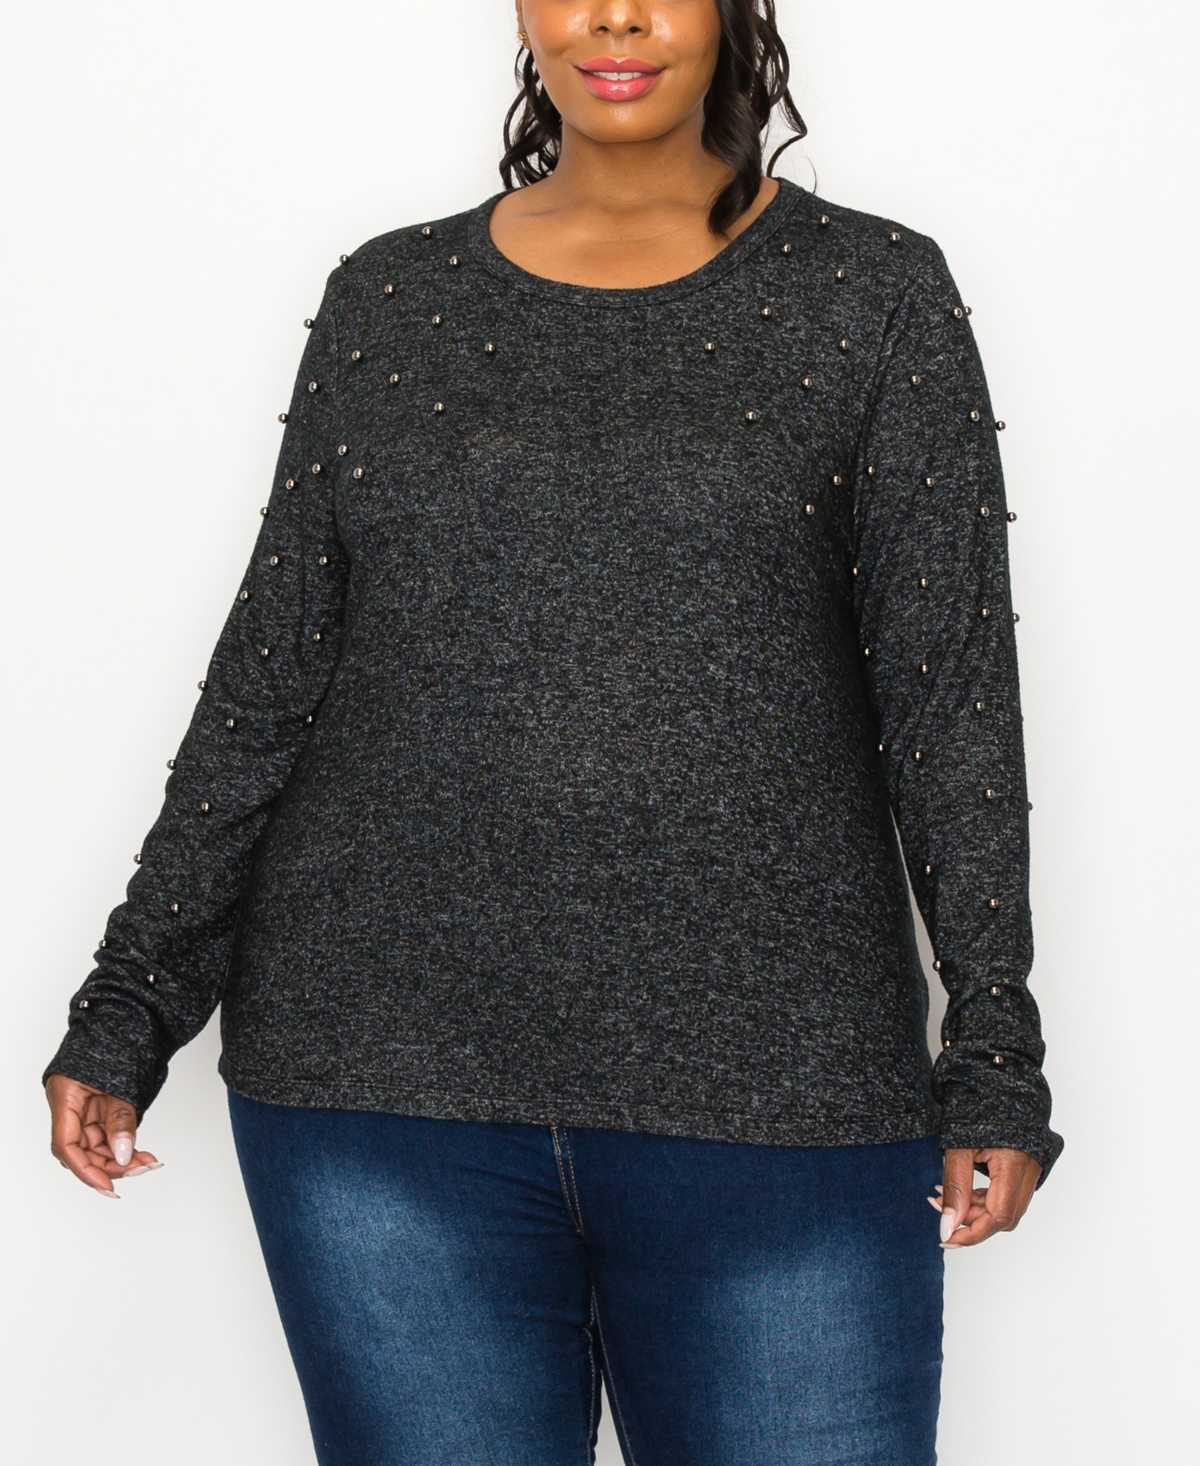 Plus Size Cozy Long Sleeve Pullover Top with Gunmetal Studs - Charcoal